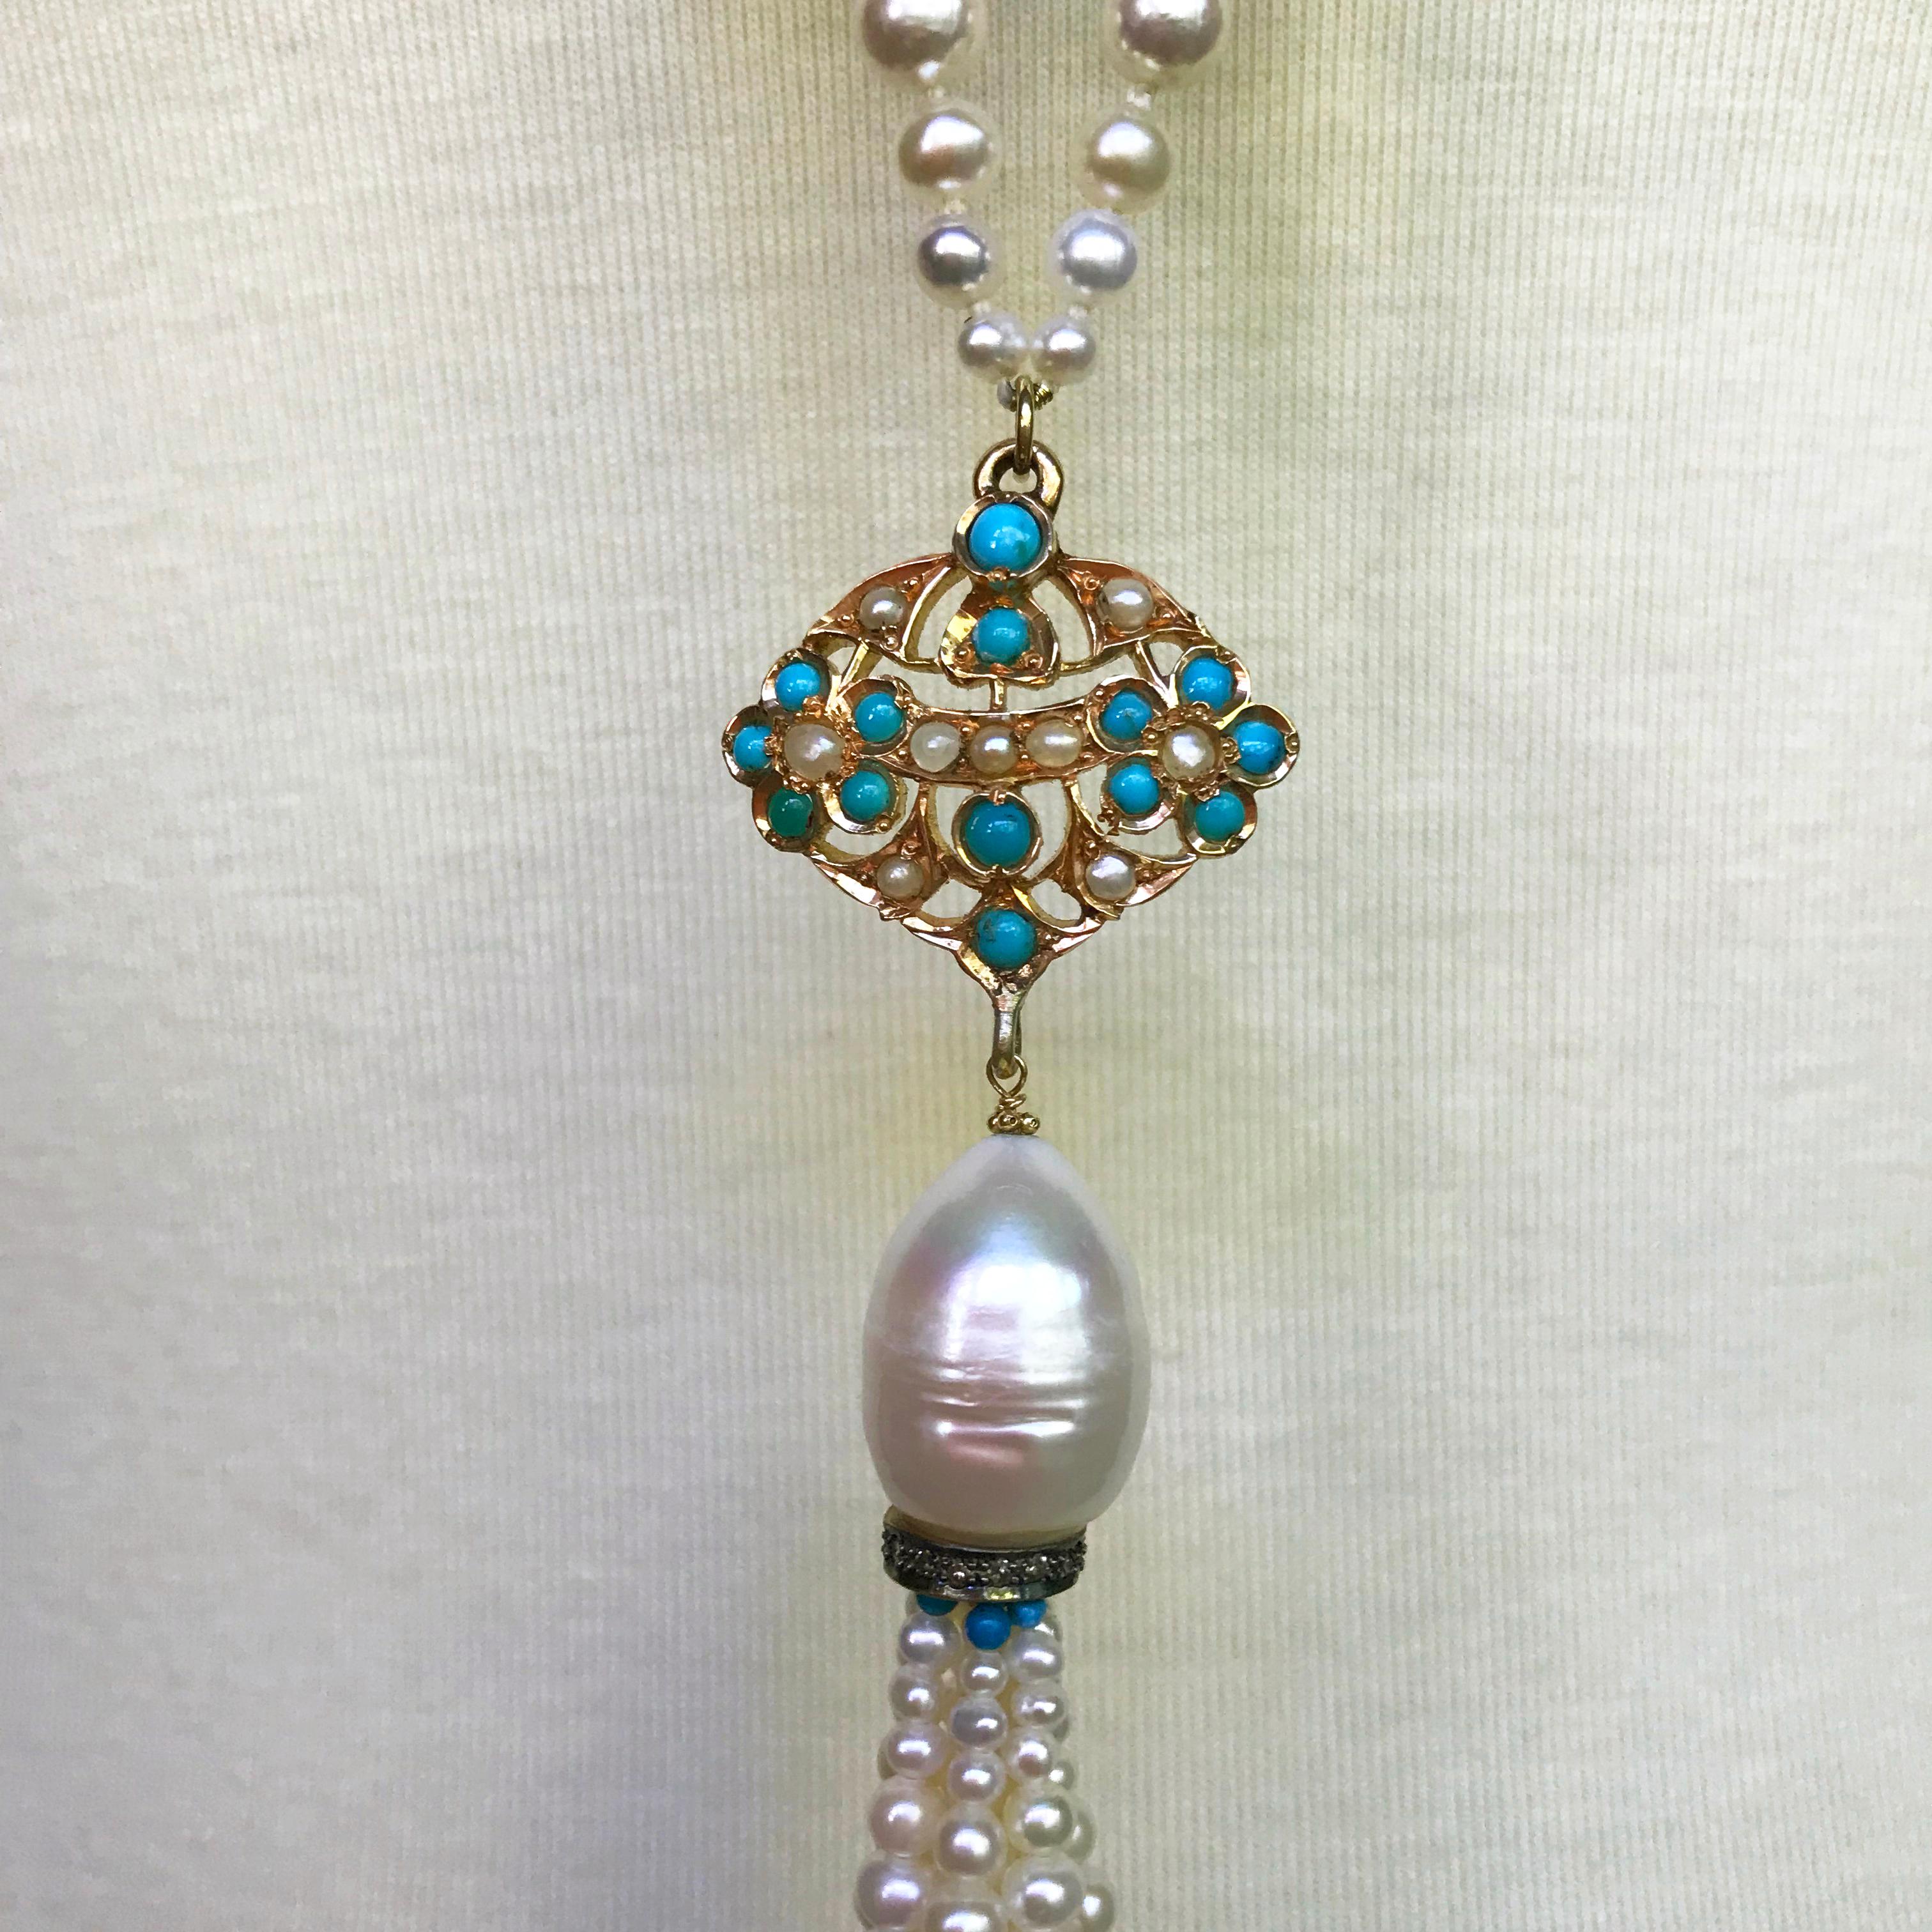 Marina J Pearl & Turquoise Necklace with 14k Gold Vintage Pendant, Beads & Clasp 3